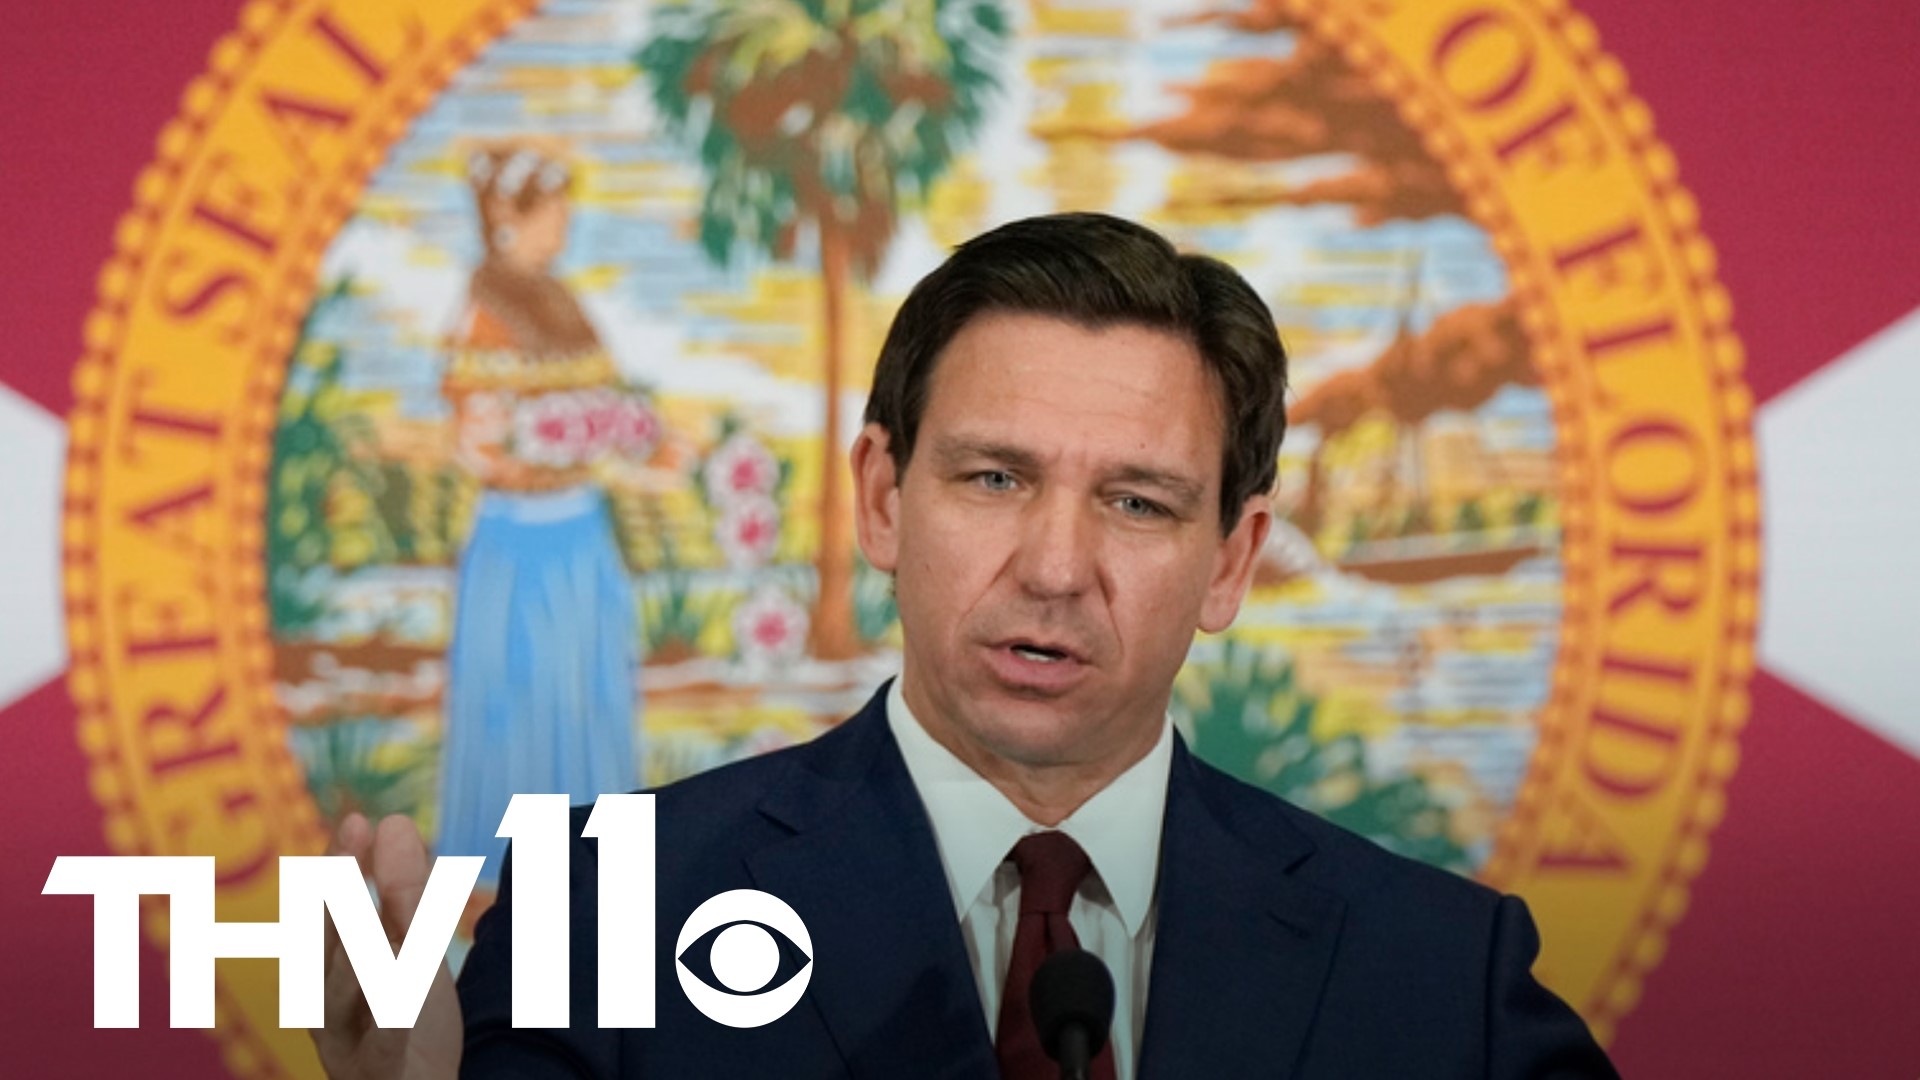 Ron Desantis has announced his presidential campaign, and now the Florida governor is stepping into a crowded Republican primary contest.